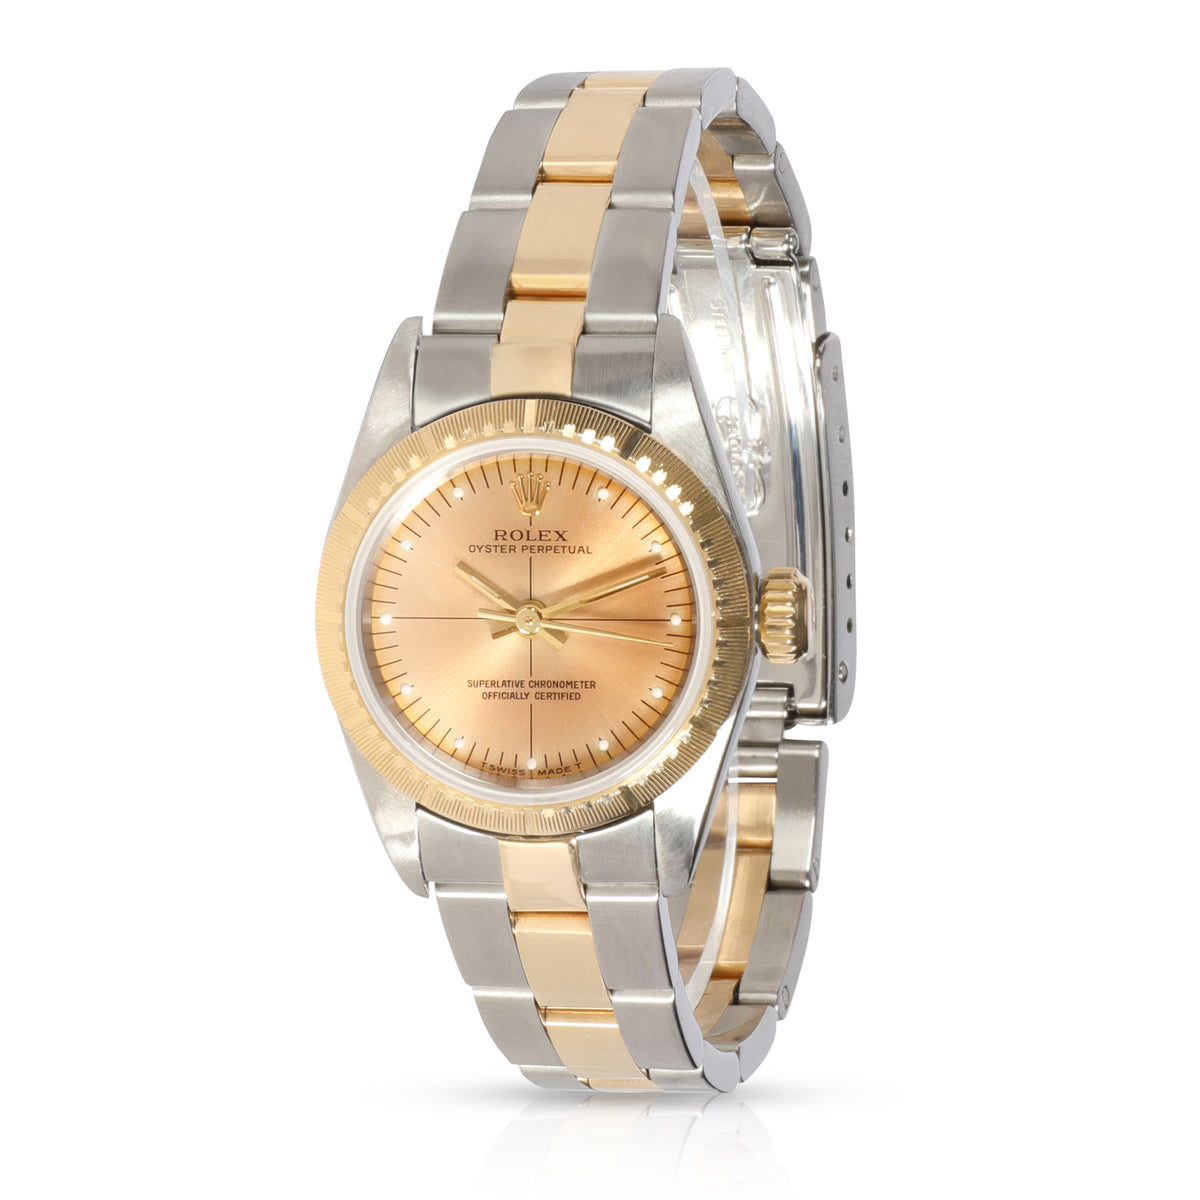 Rolex Oyster Perpetual Zephyr 67233 Women's Watch in 18kt Yellow Gold